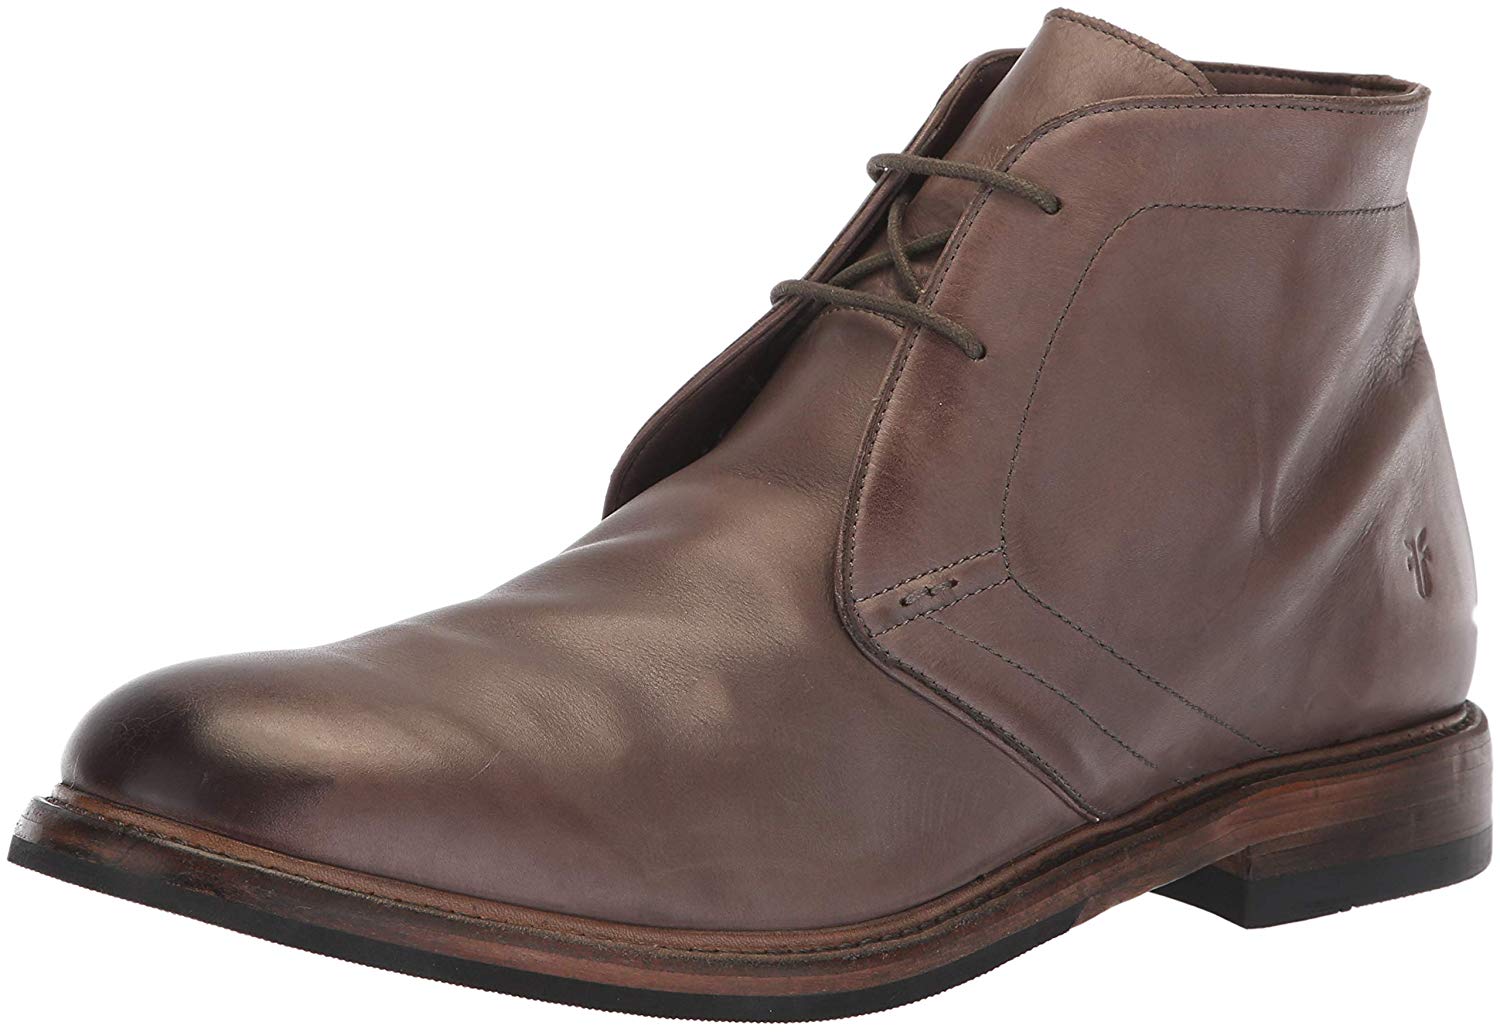 Frye Mens Murray Chukka Leather Closed Toe Ankle Fashion Boots, Grey ...